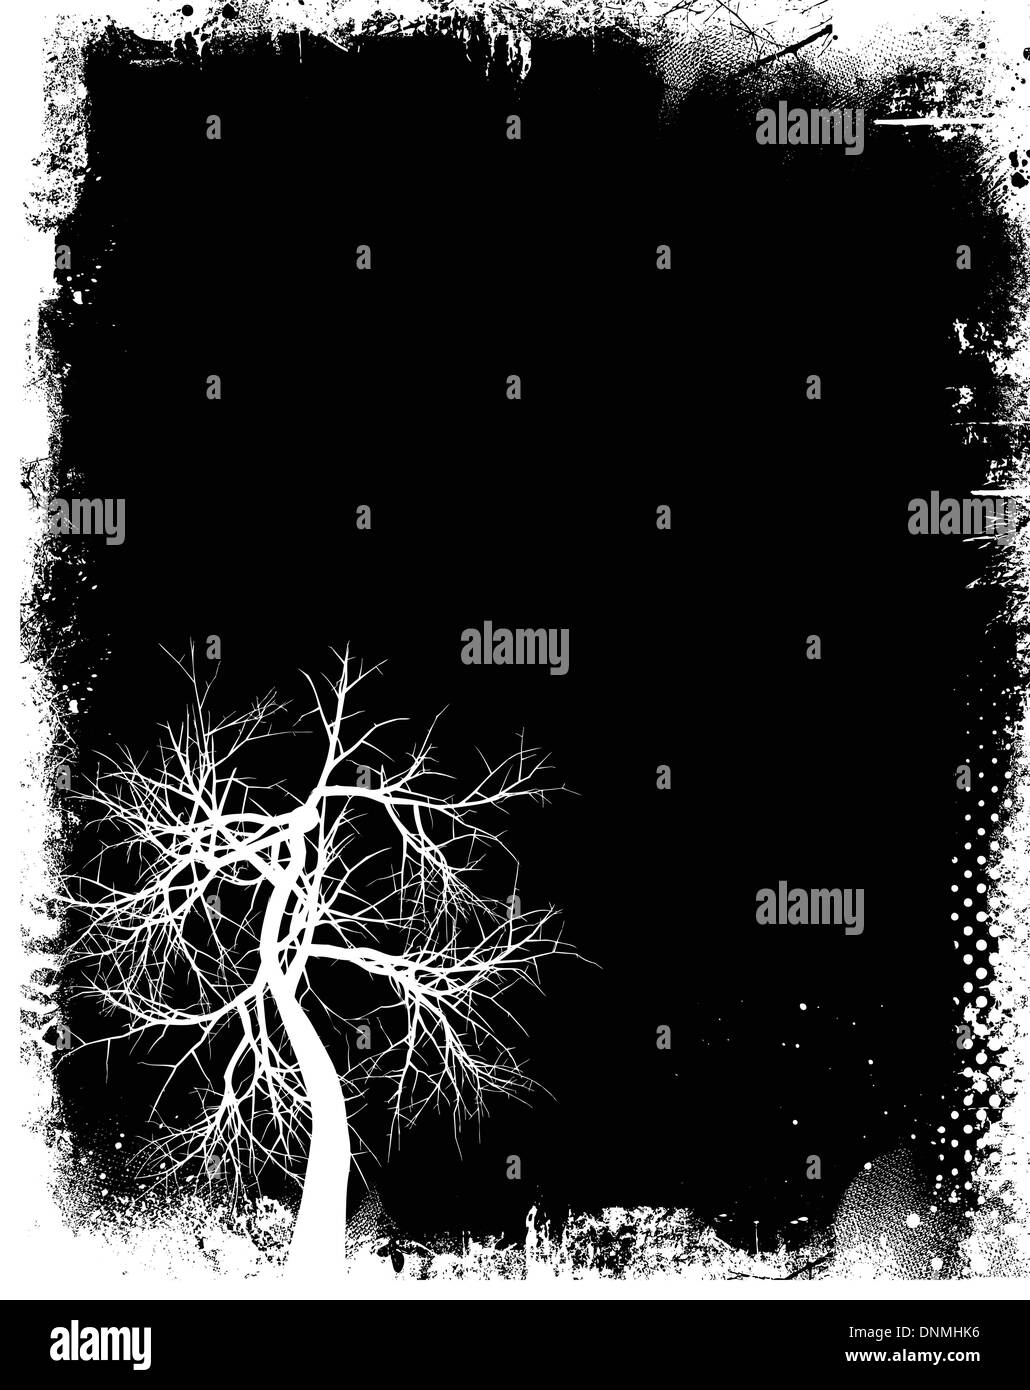 Silhouette of trees on grunge background Stock Vector